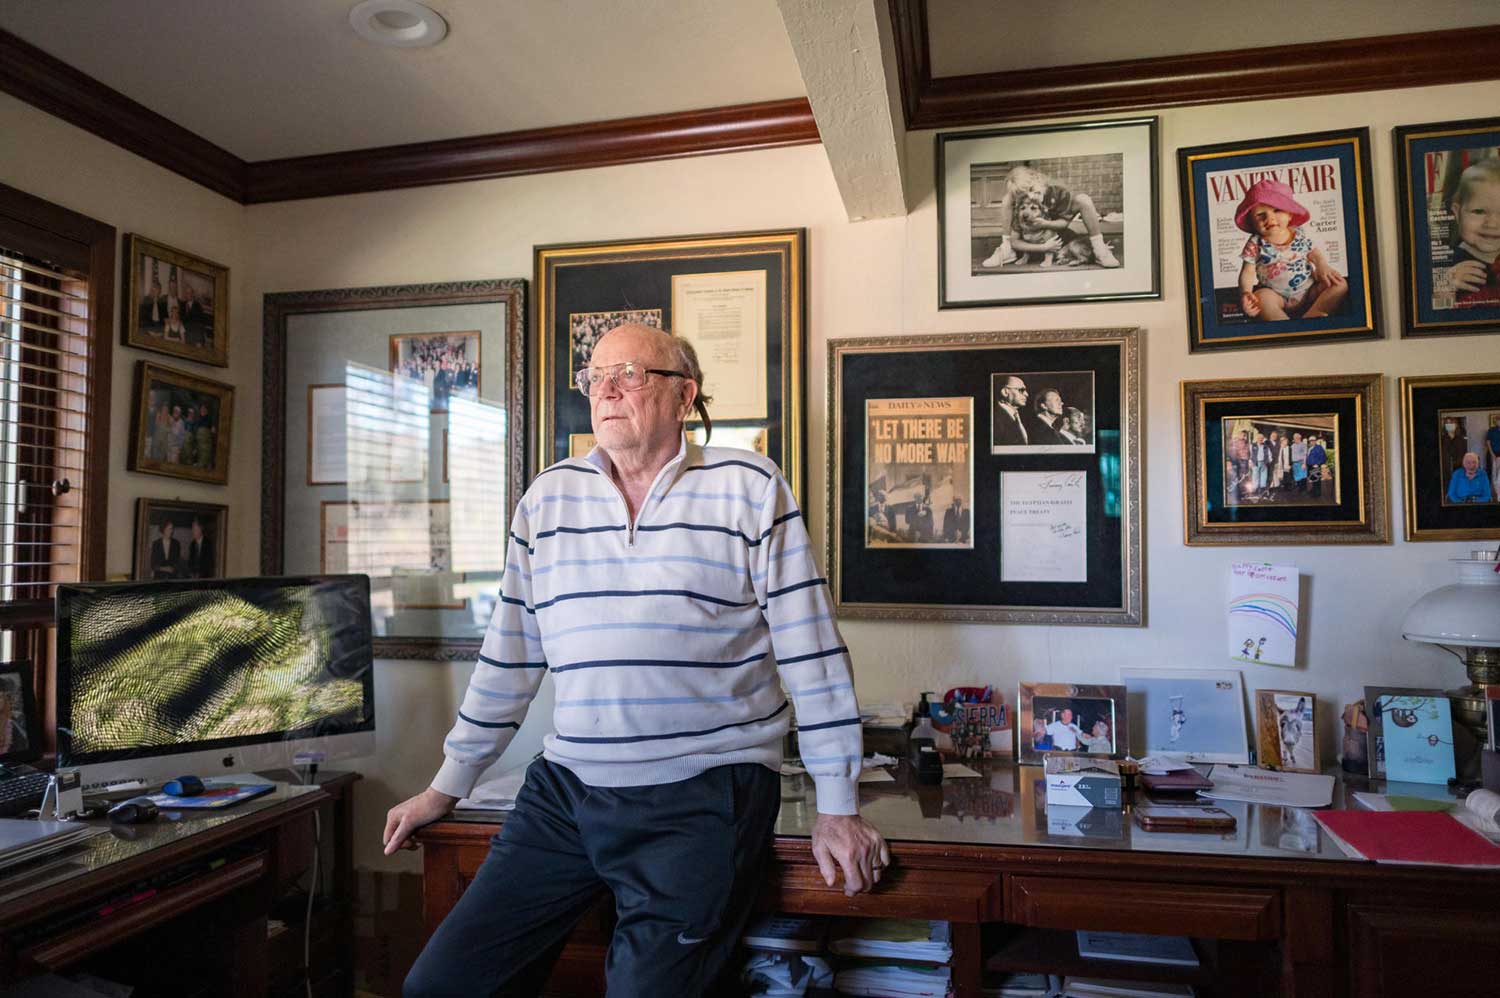 Dan Ostrander in his home office, surrounded by framed newspaper clippings and photos.